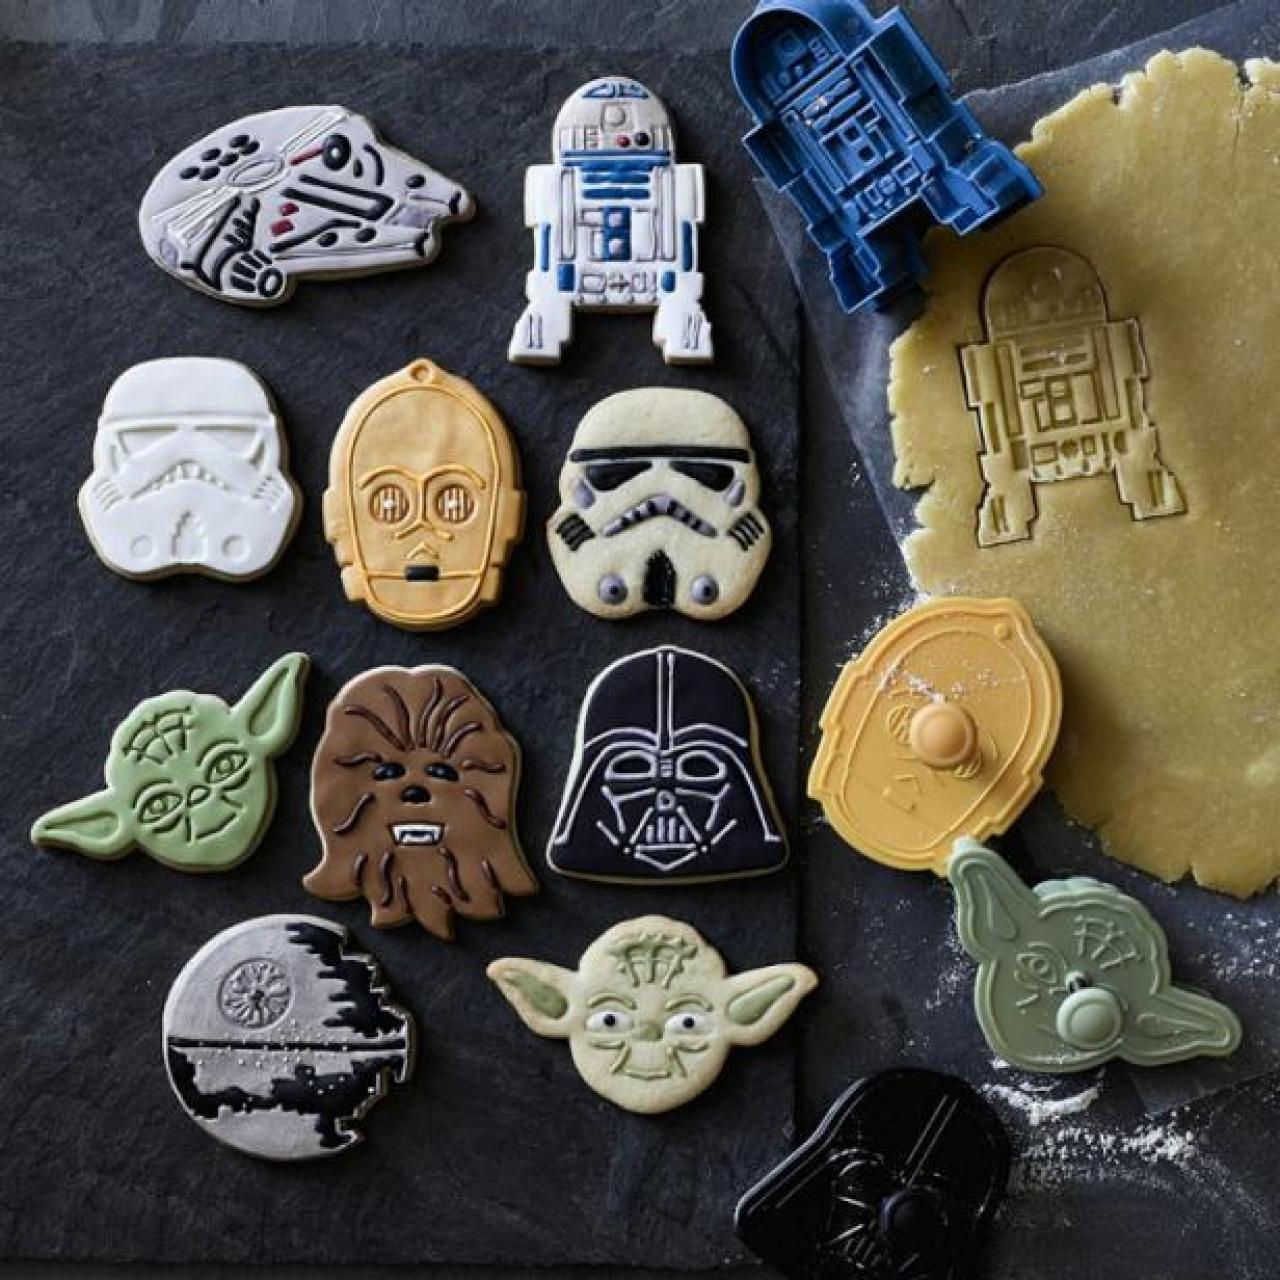 Star Wars Droid Kitchen Containers: The Coffee You're Looking for